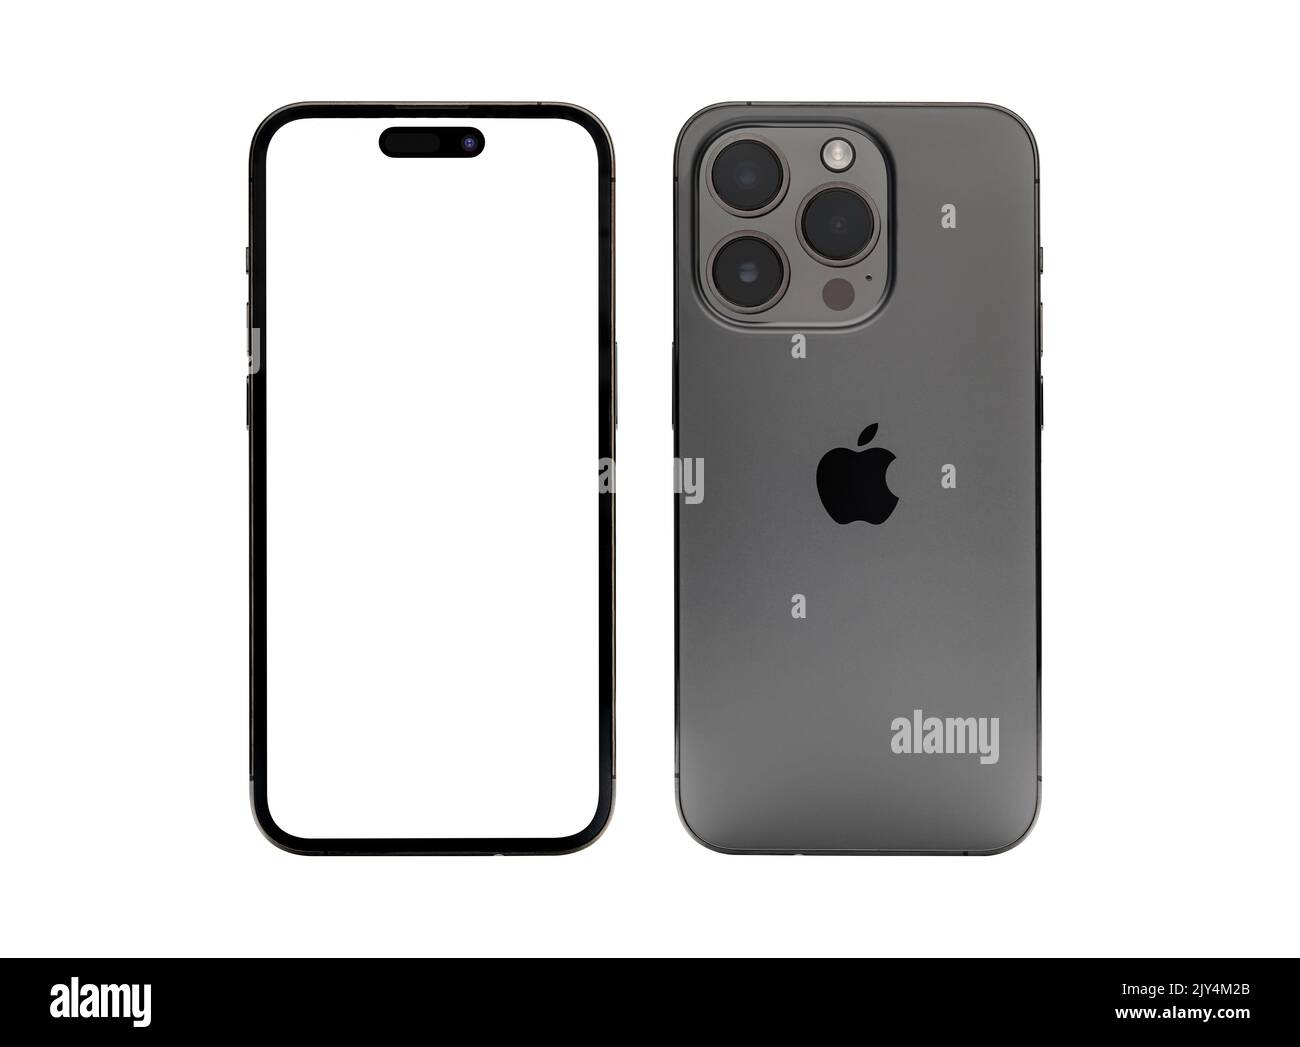 Antalya, Turkey - September 08, 2022: Newly released iphone 14 pro mockup set with back and front angles Stock Photo